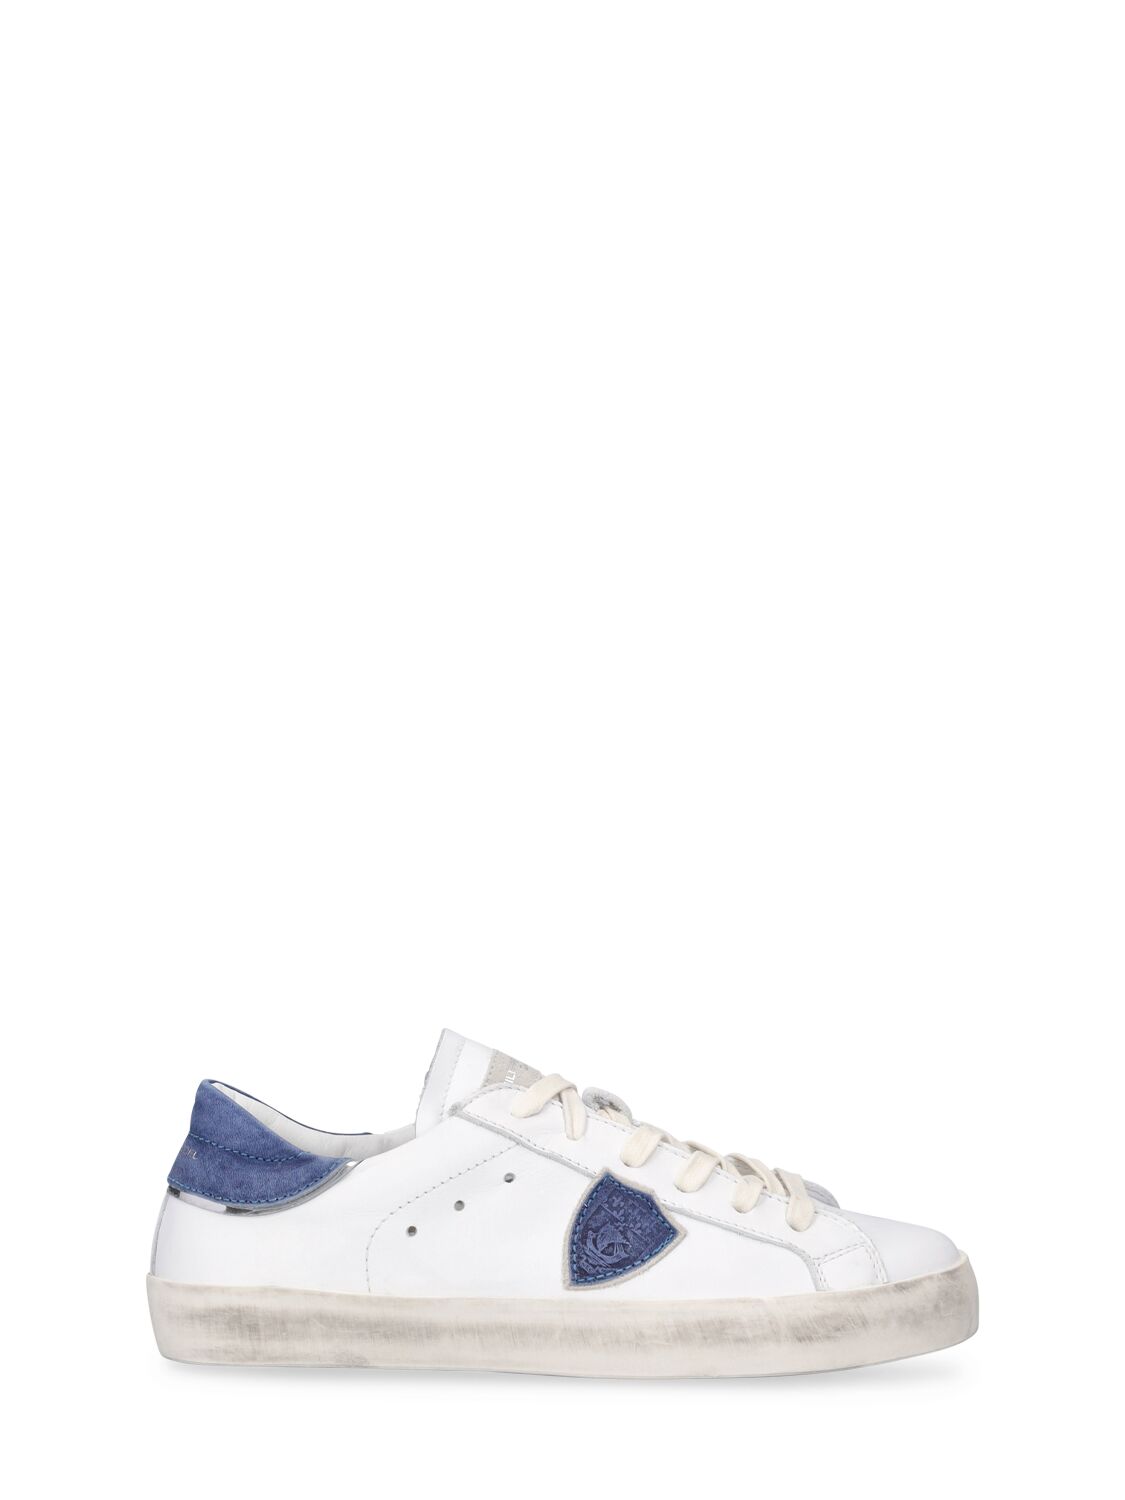 Philippe Model Kids' Paris Leather Lace-up Sneakers In White,blue